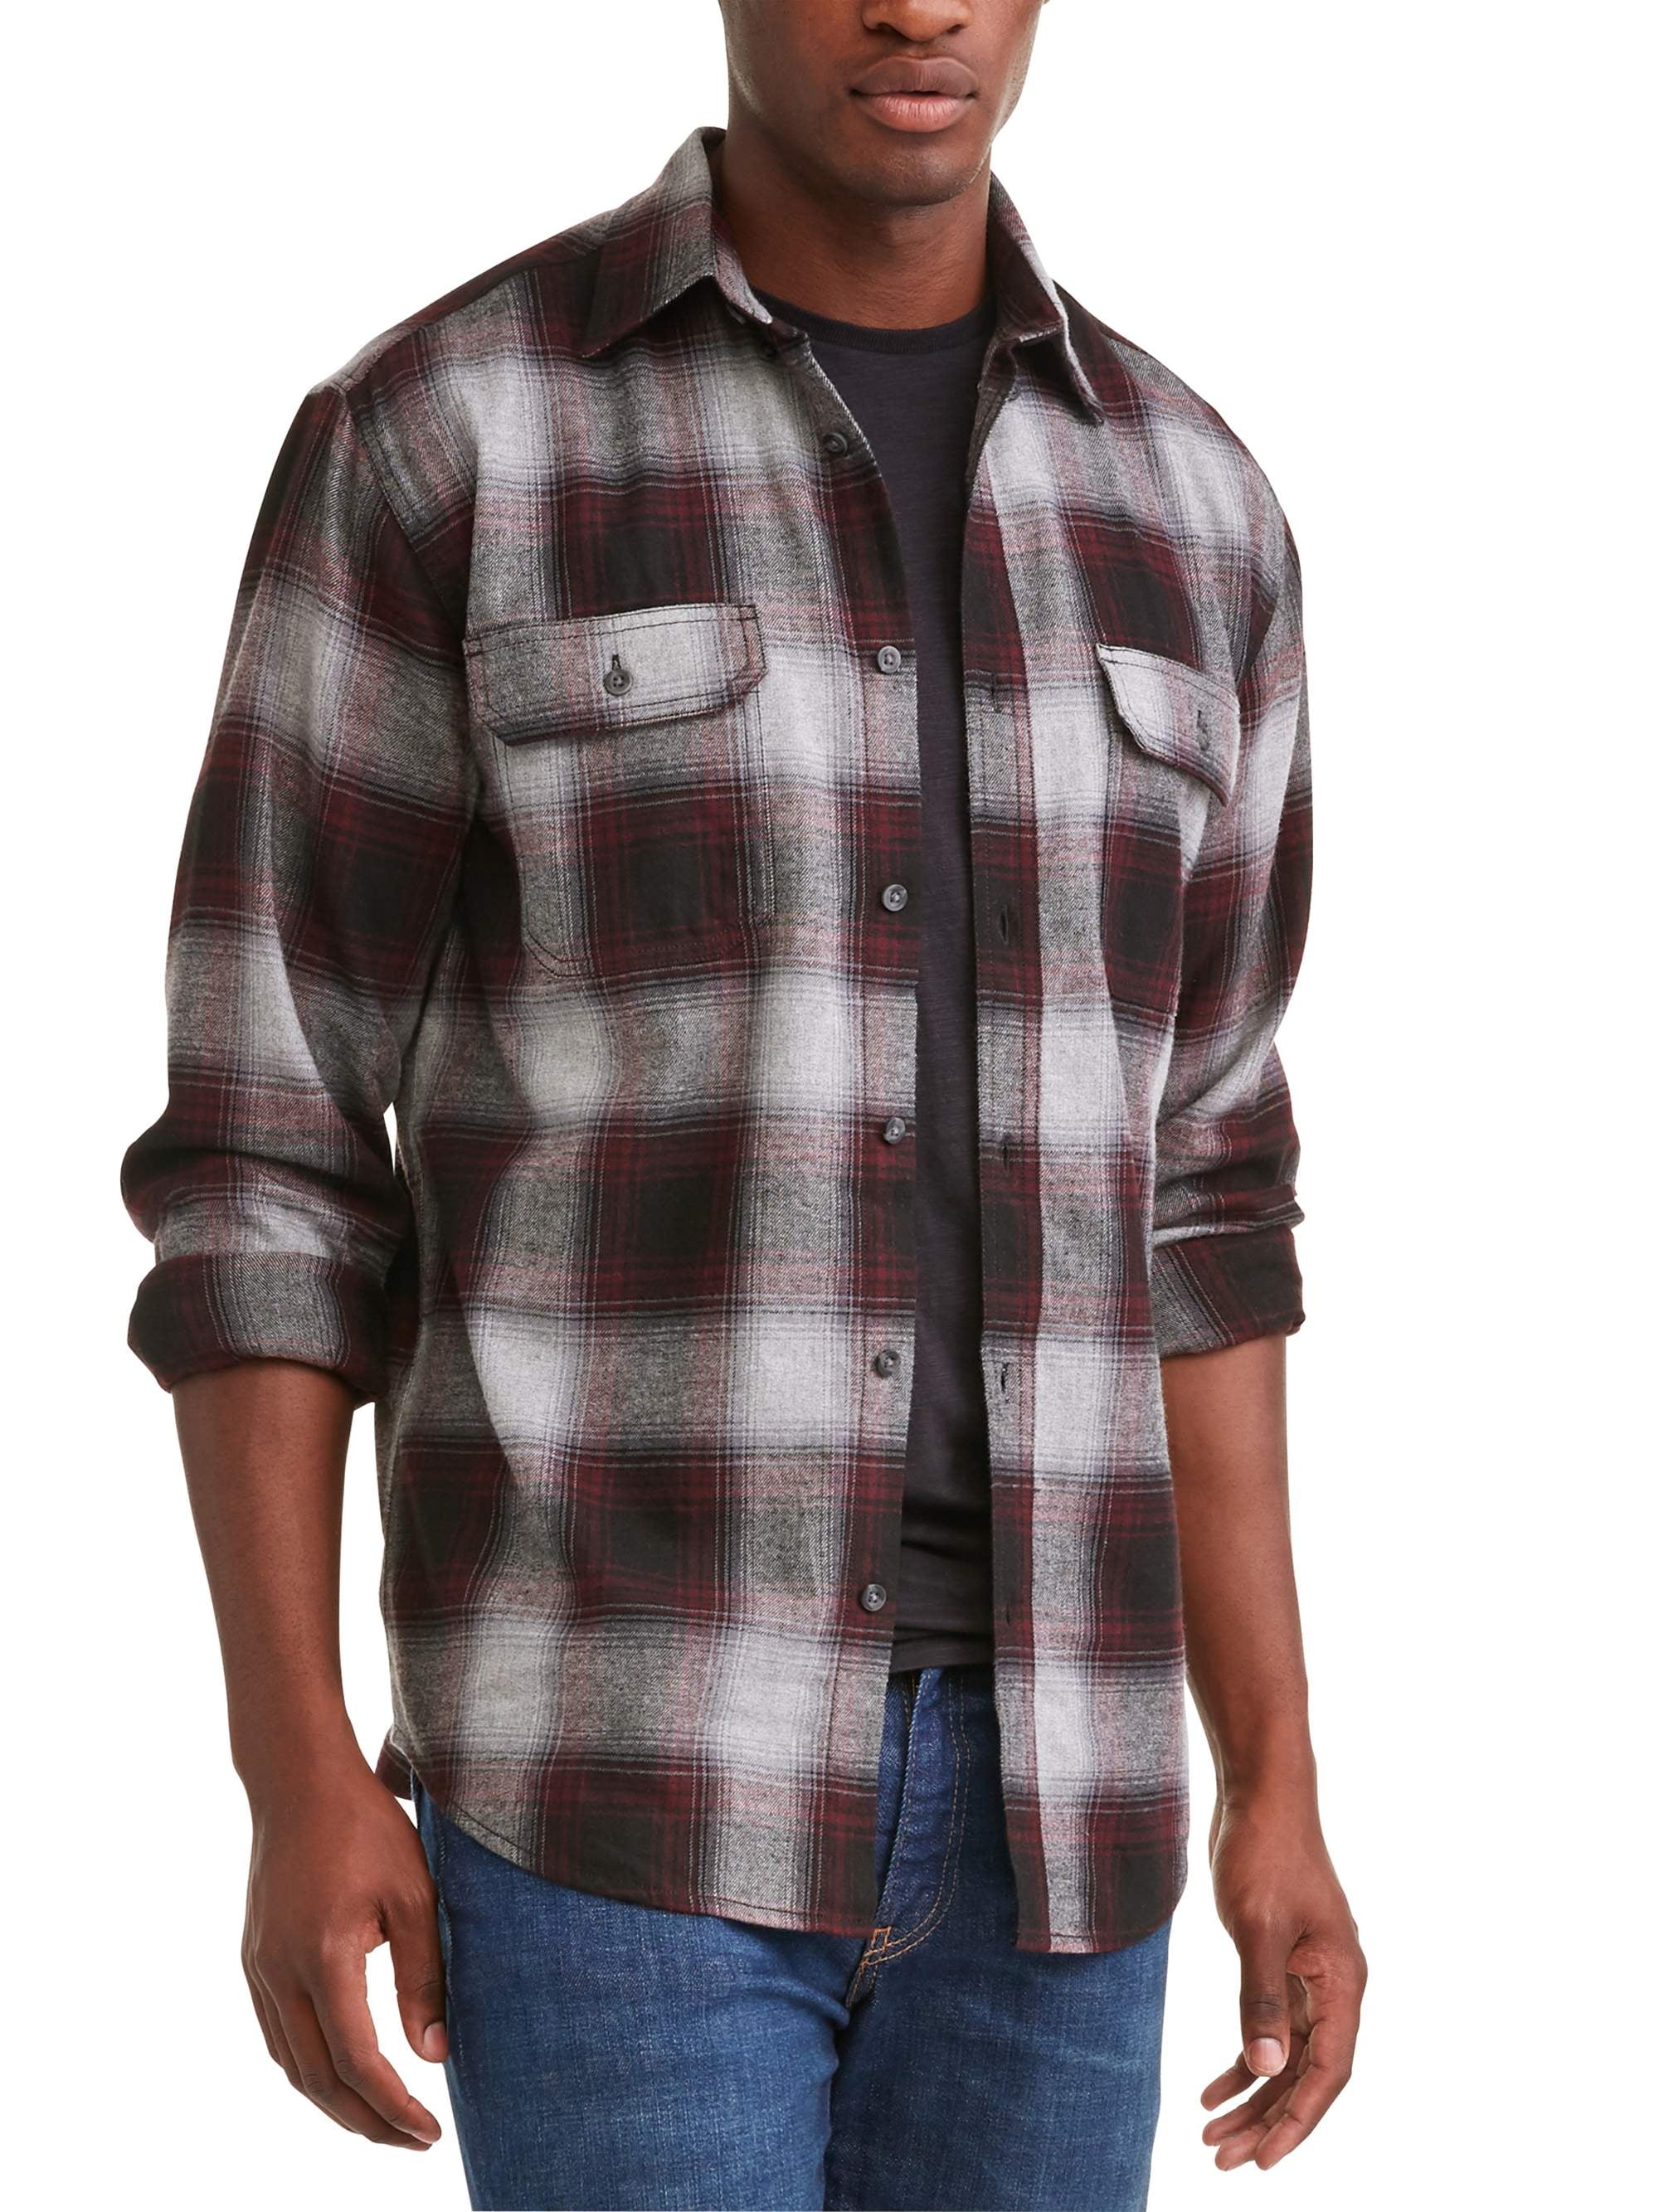 Men's Long Sleeve Flannel Shirts Only $5 | SwagGrabber